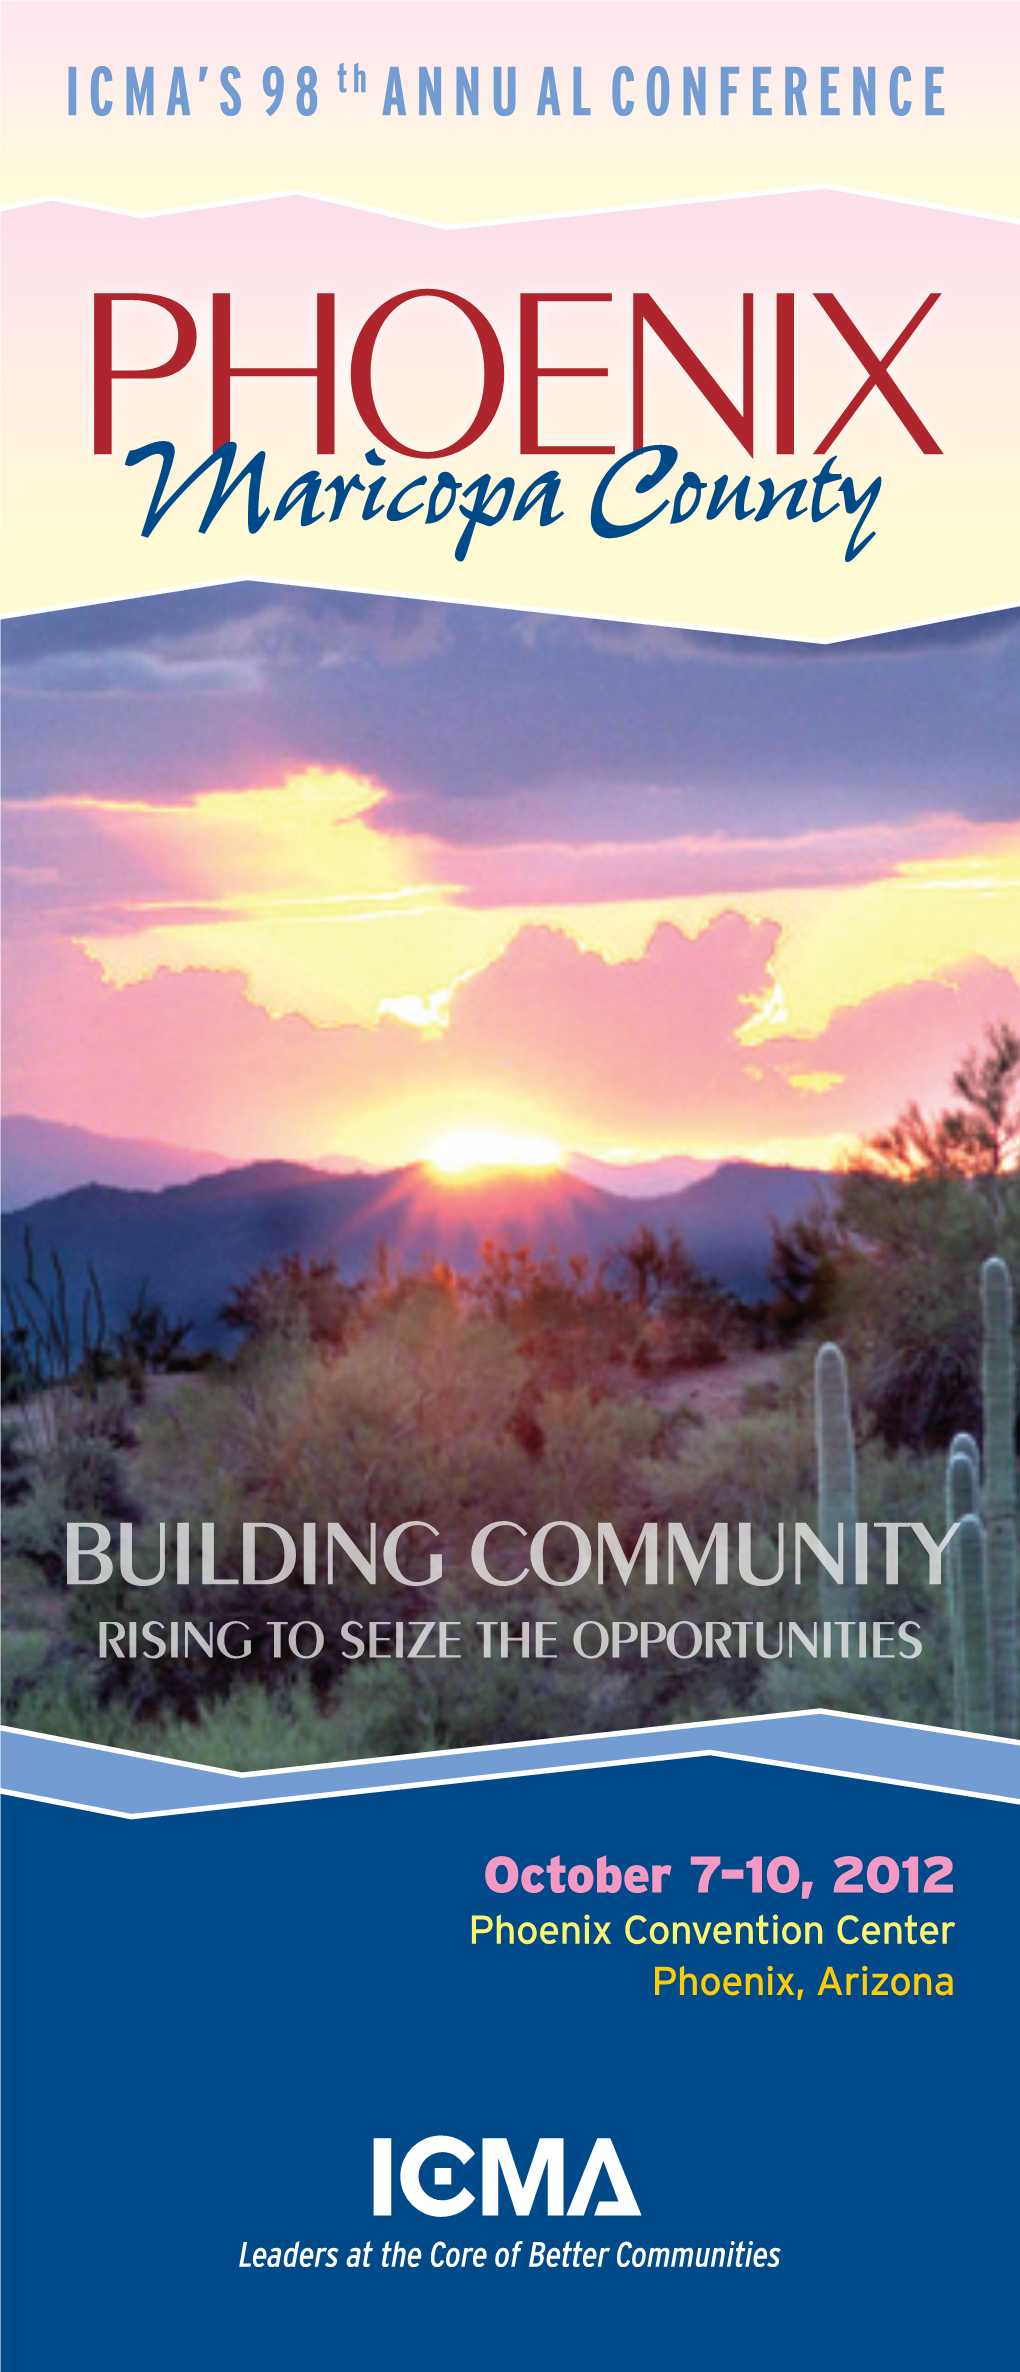 PHOENIX Since Our Founding in 1972, ICMA-RC’S Mission Has Been to Help Public Employees Build Retirement Security